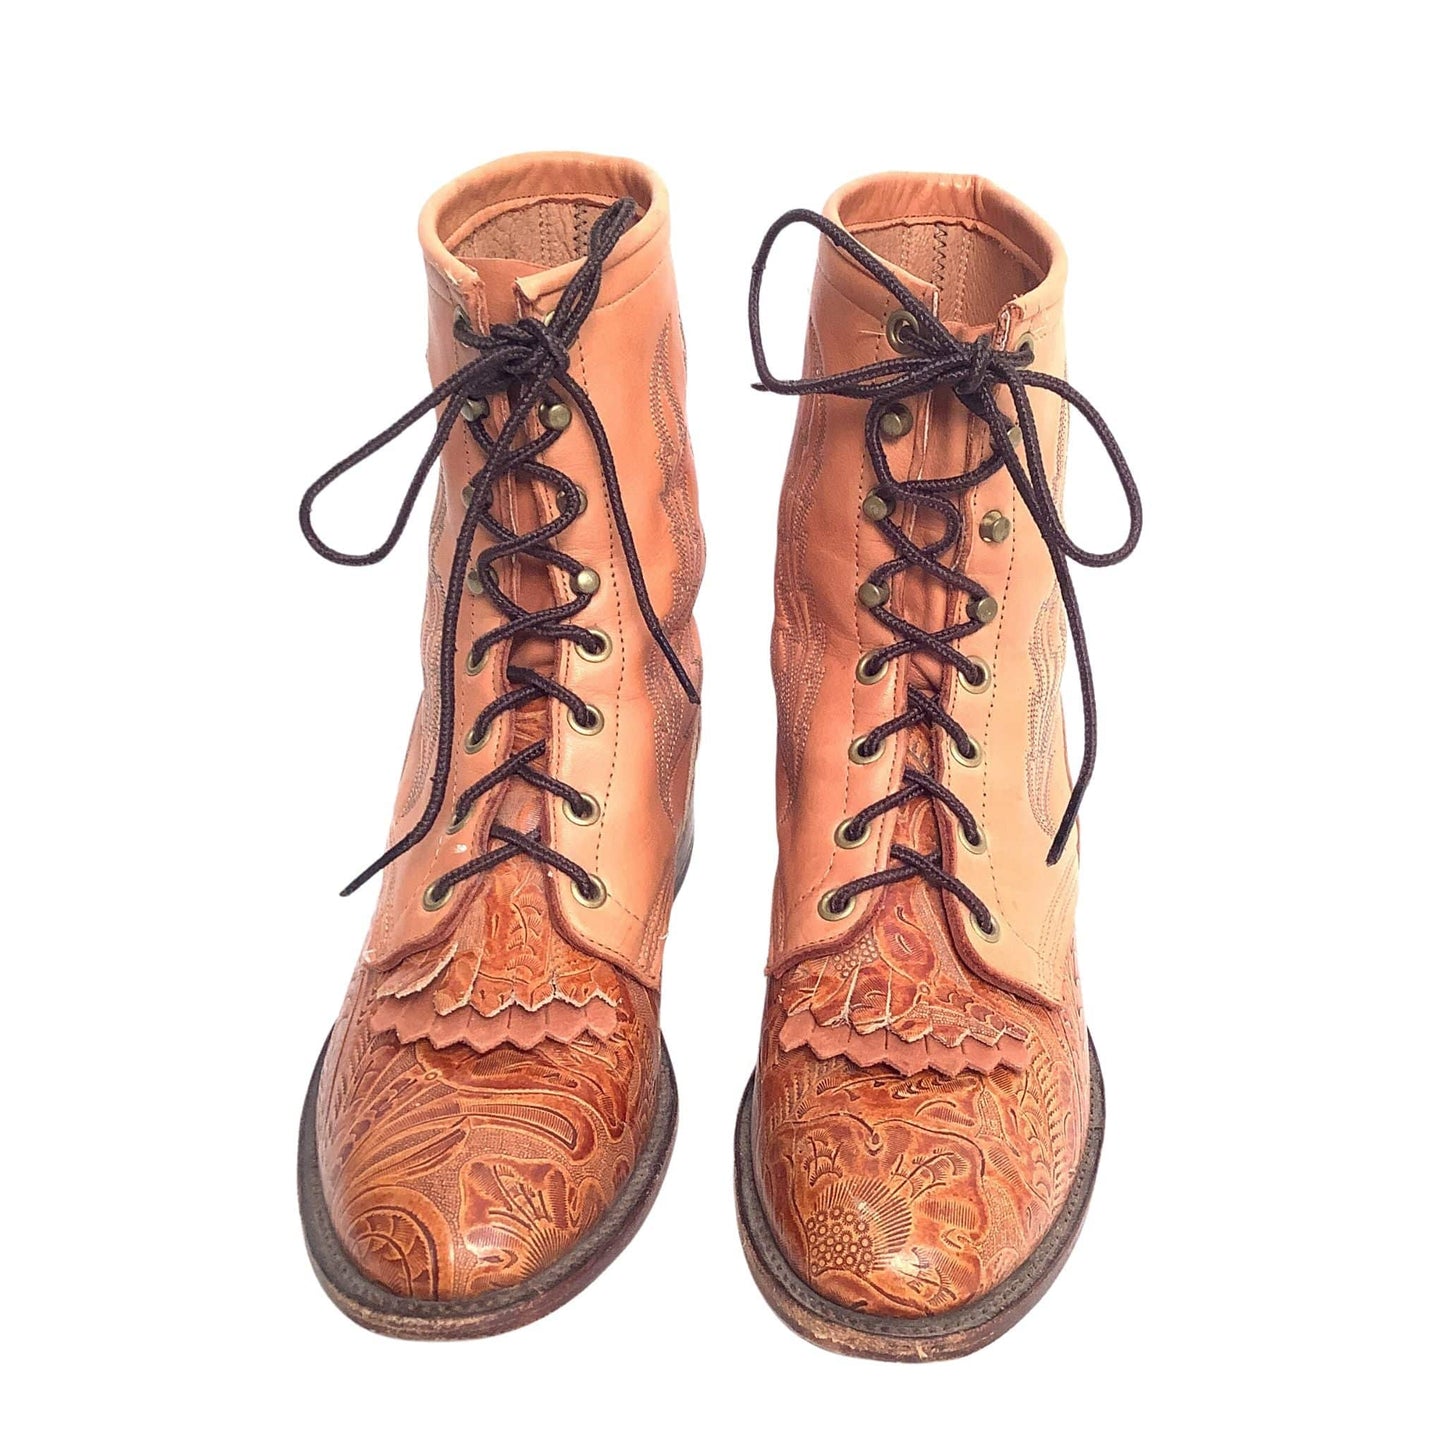 Larry Mahan Tooled Boots 8.5 / Tan / Vintage 1990s